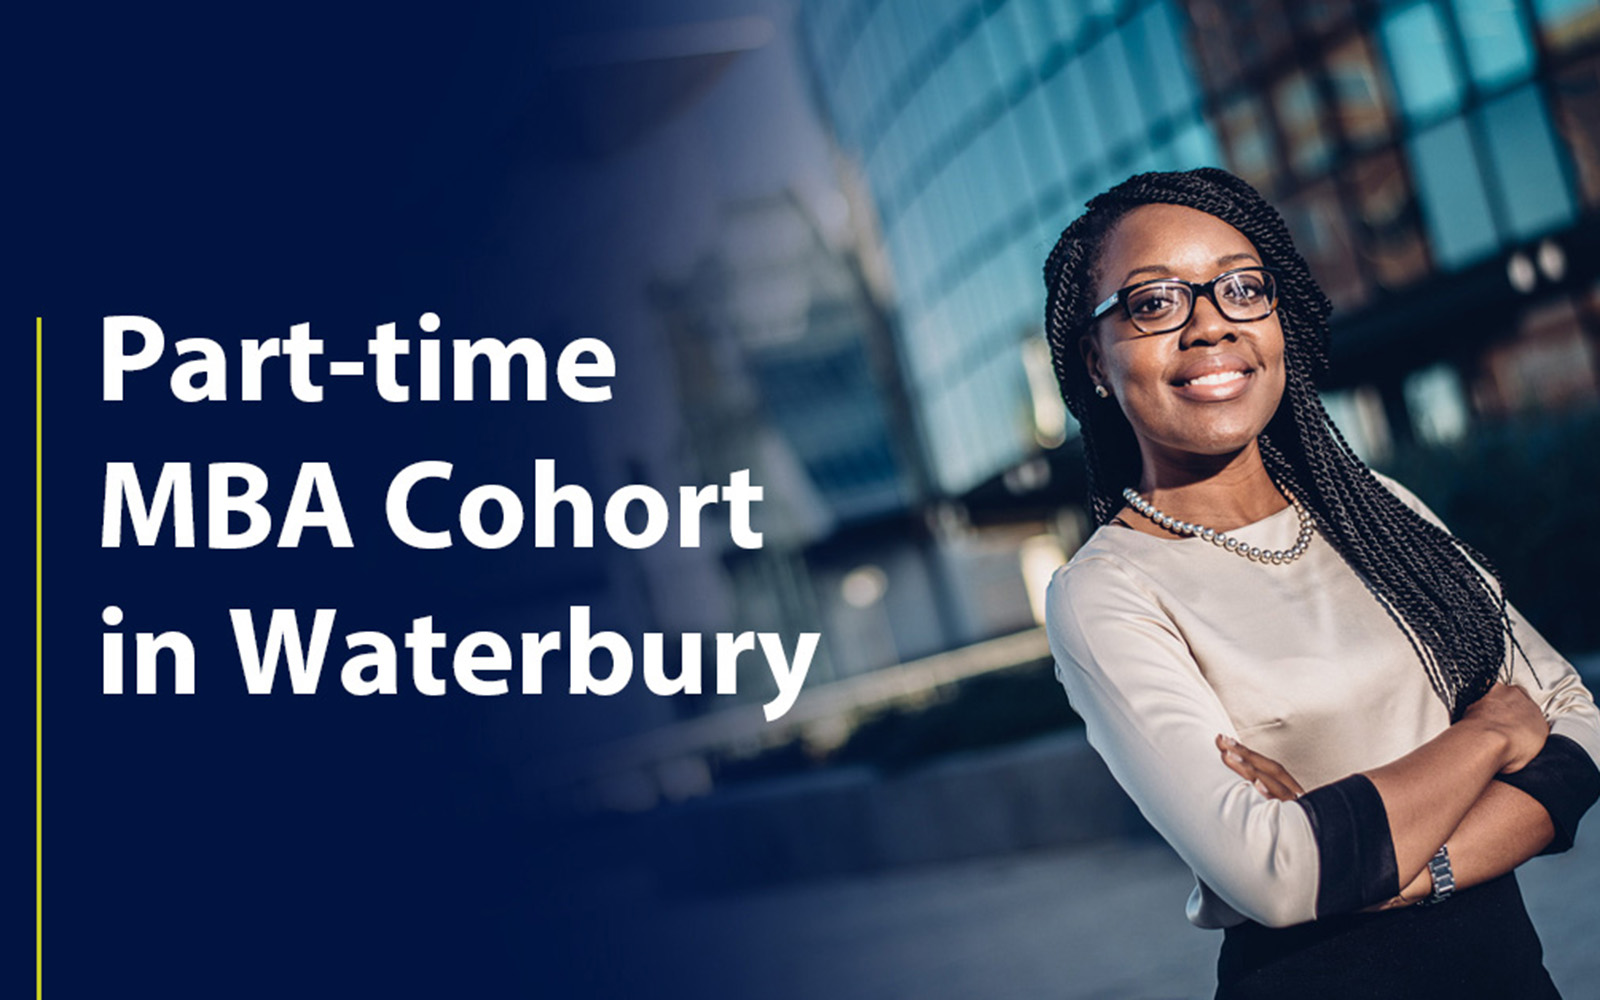 New Part-time MBA Cohort in Waterbury